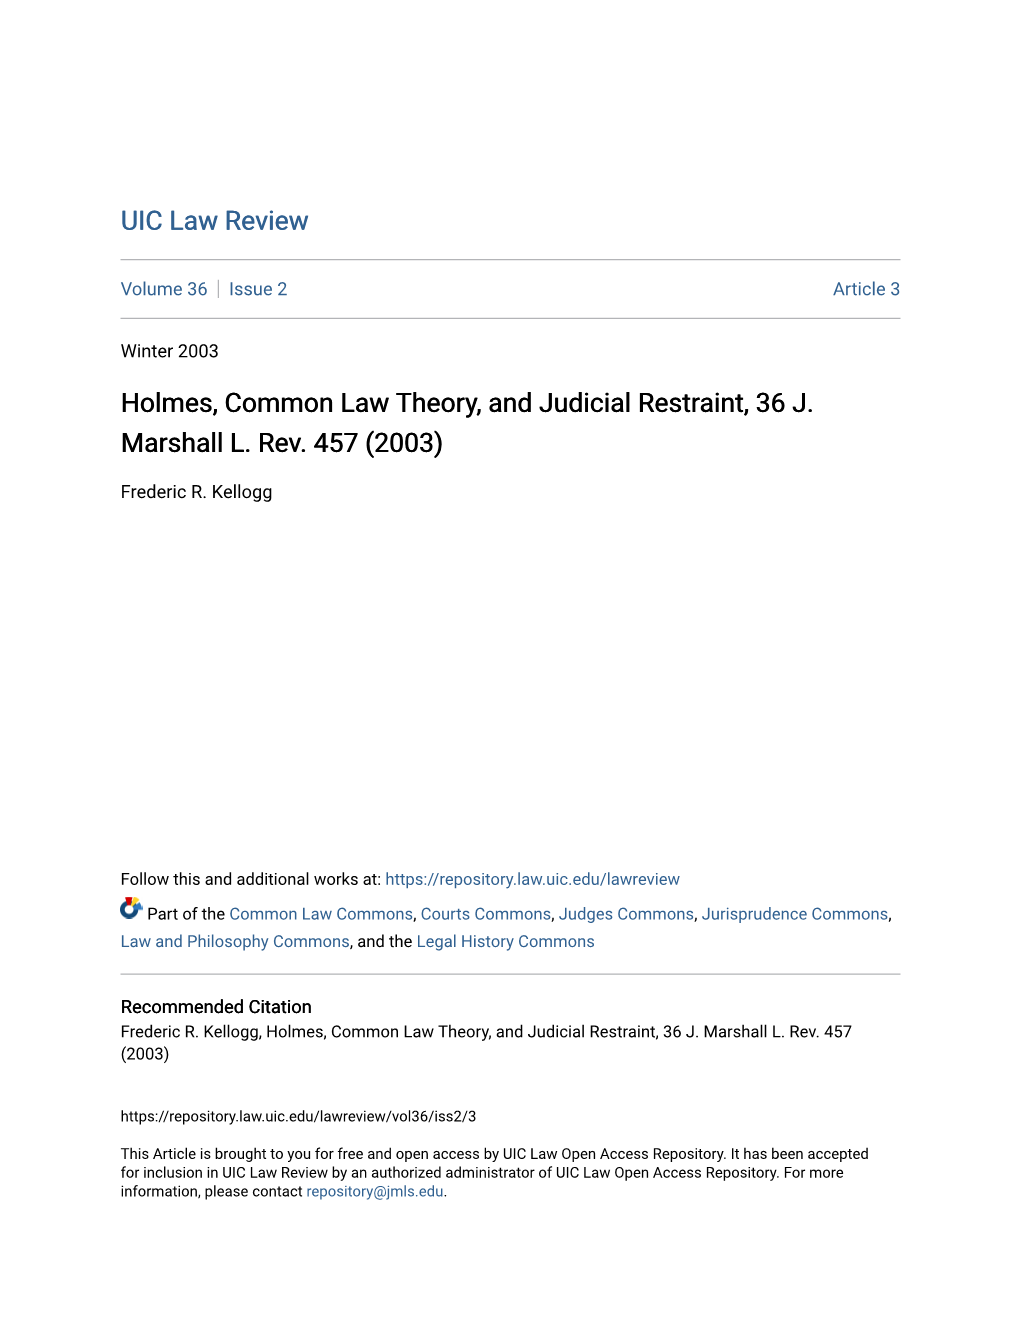 Holmes, Common Law Theory, and Judicial Restraint, 36 J. Marshall L